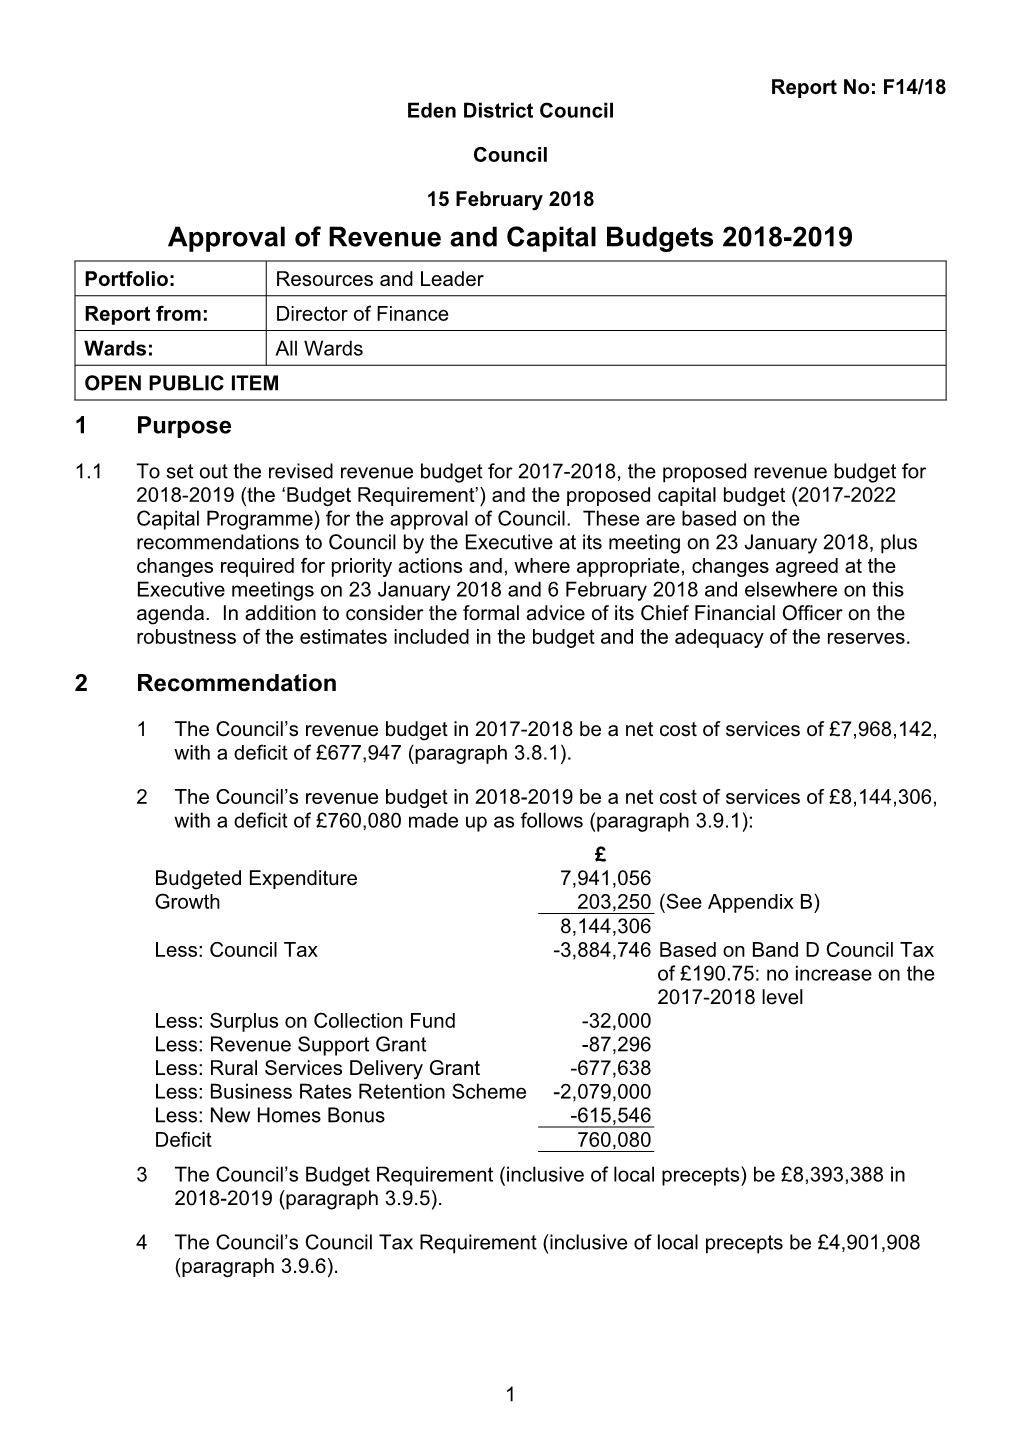 Approval of Revenue and Capital Budgets 2018-2019 Portfolio: Resources and Leader Report From: Director of Finance Wards: All Wards OPEN PUBLIC ITEM 1 Purpose